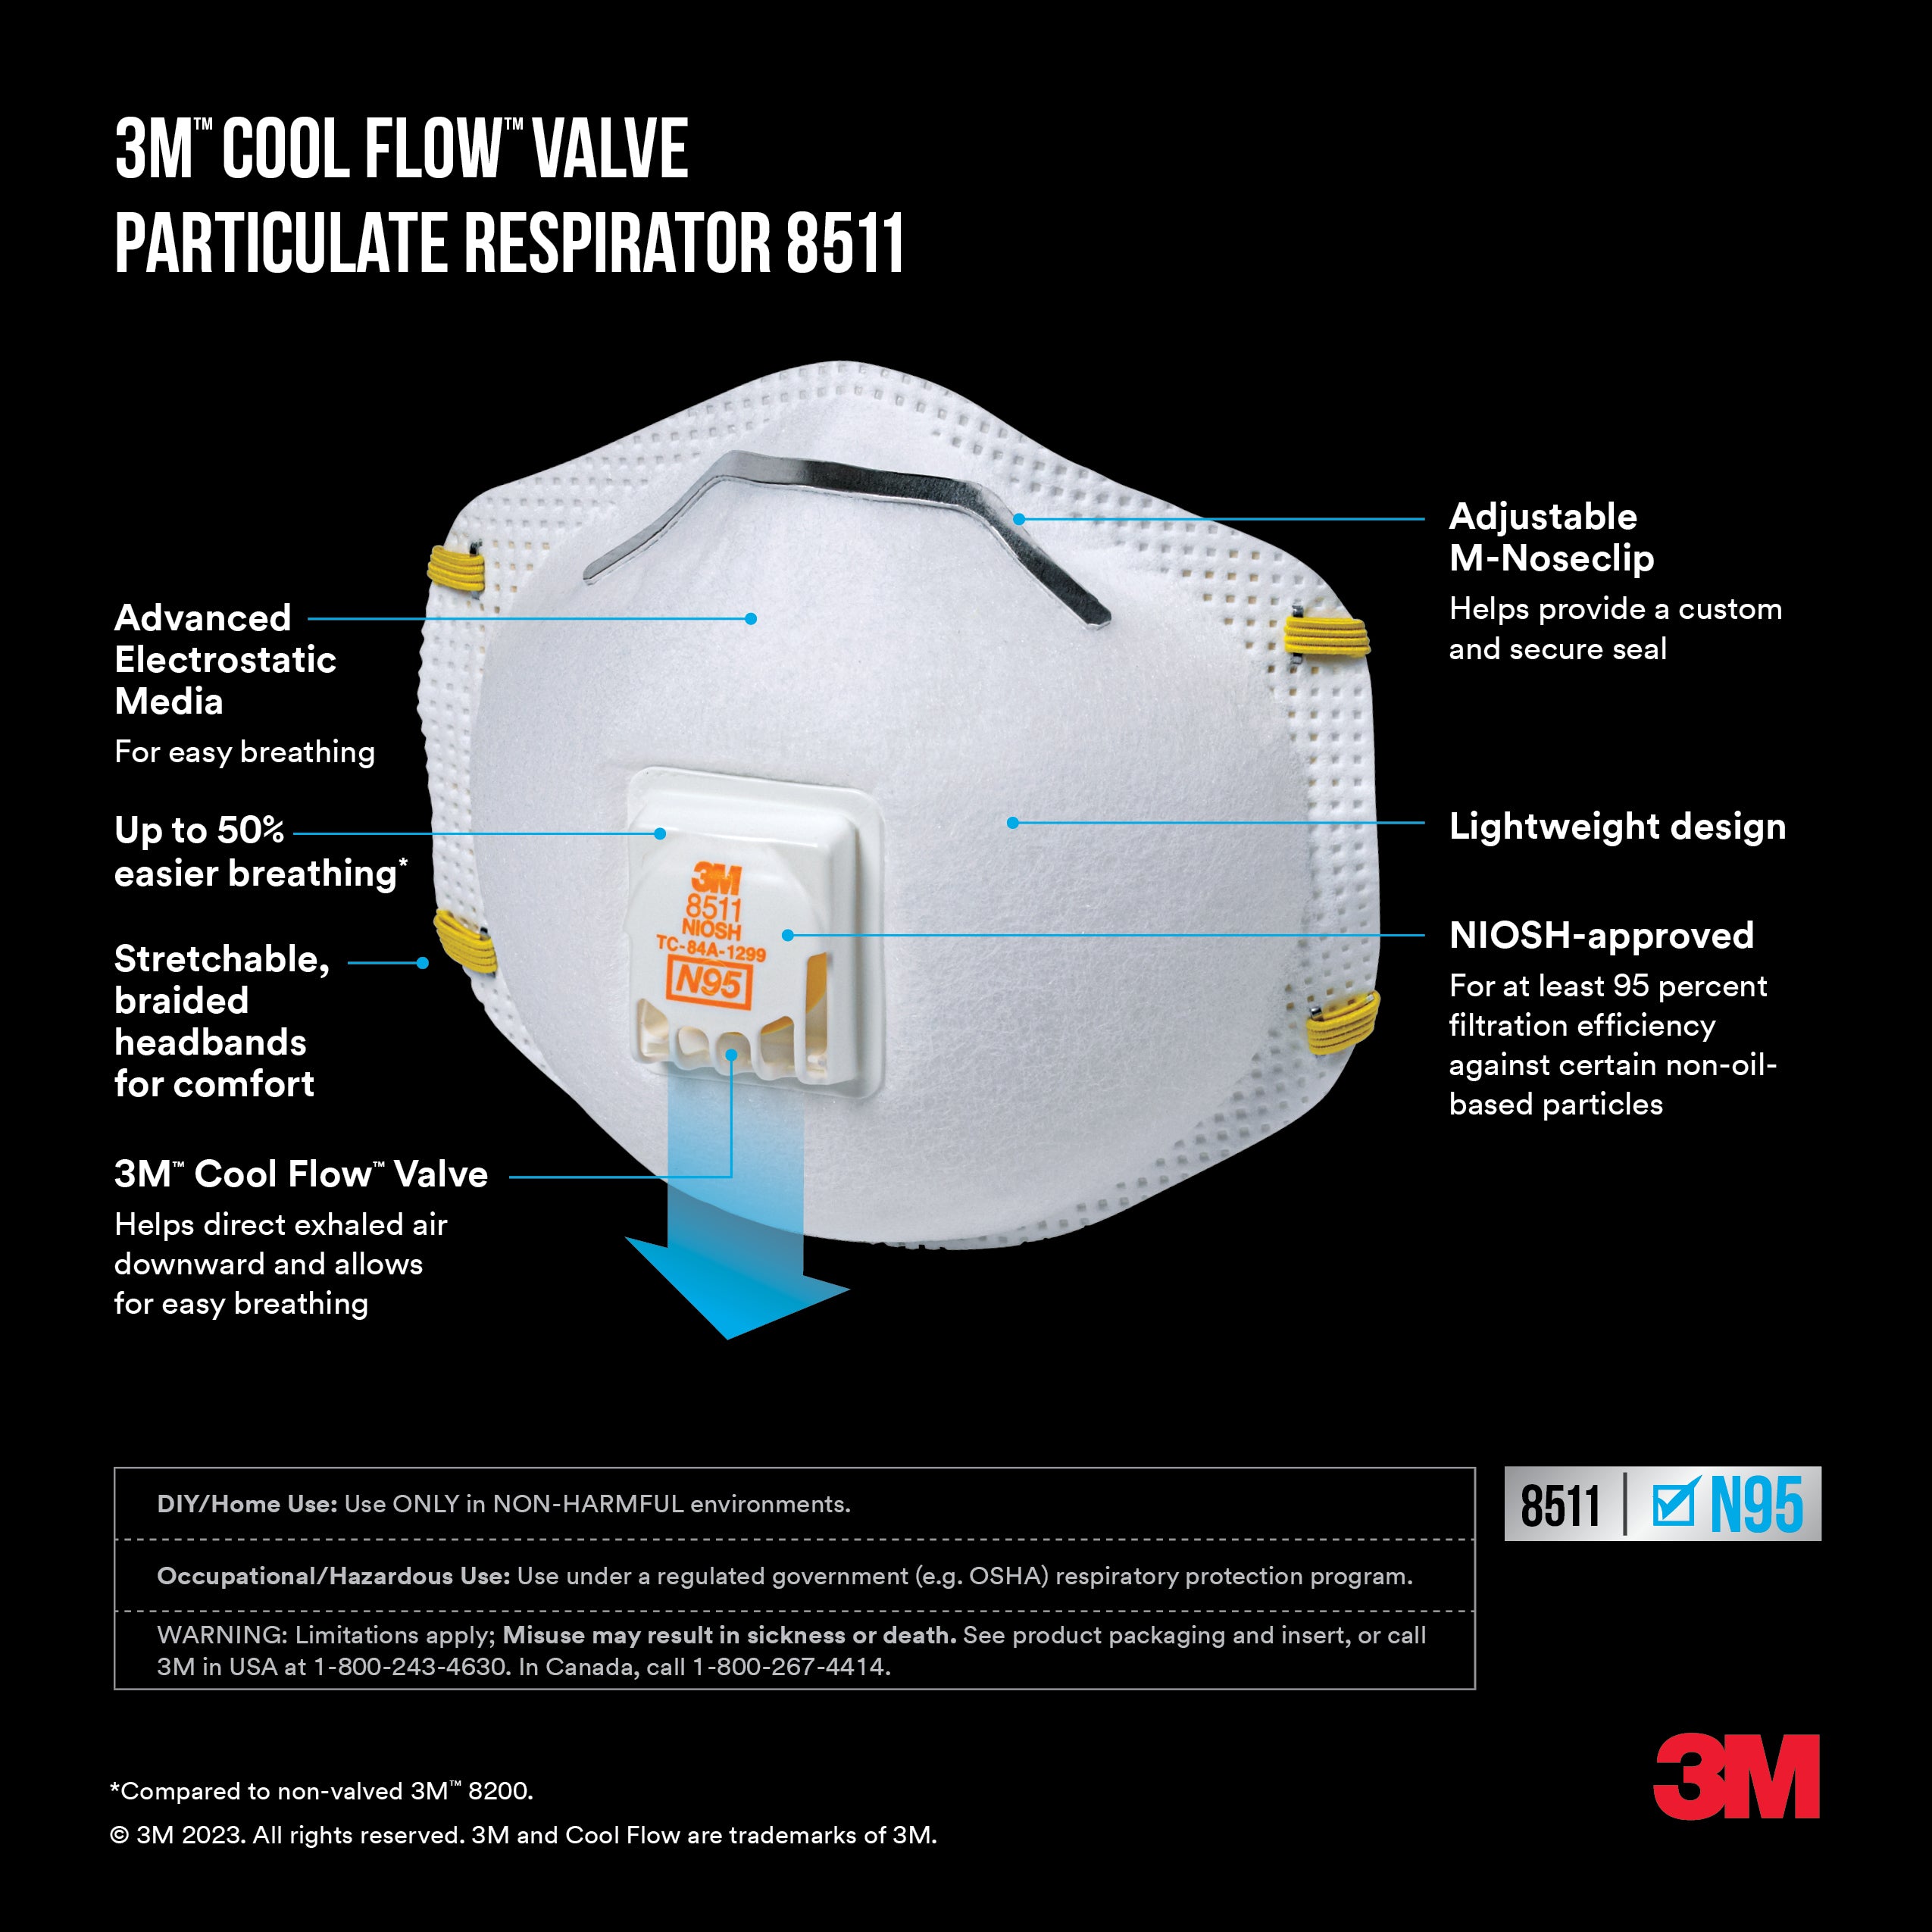 3M 8511 N95 Particulate Respirator Mask with CoolFlow Valve, Box of 10